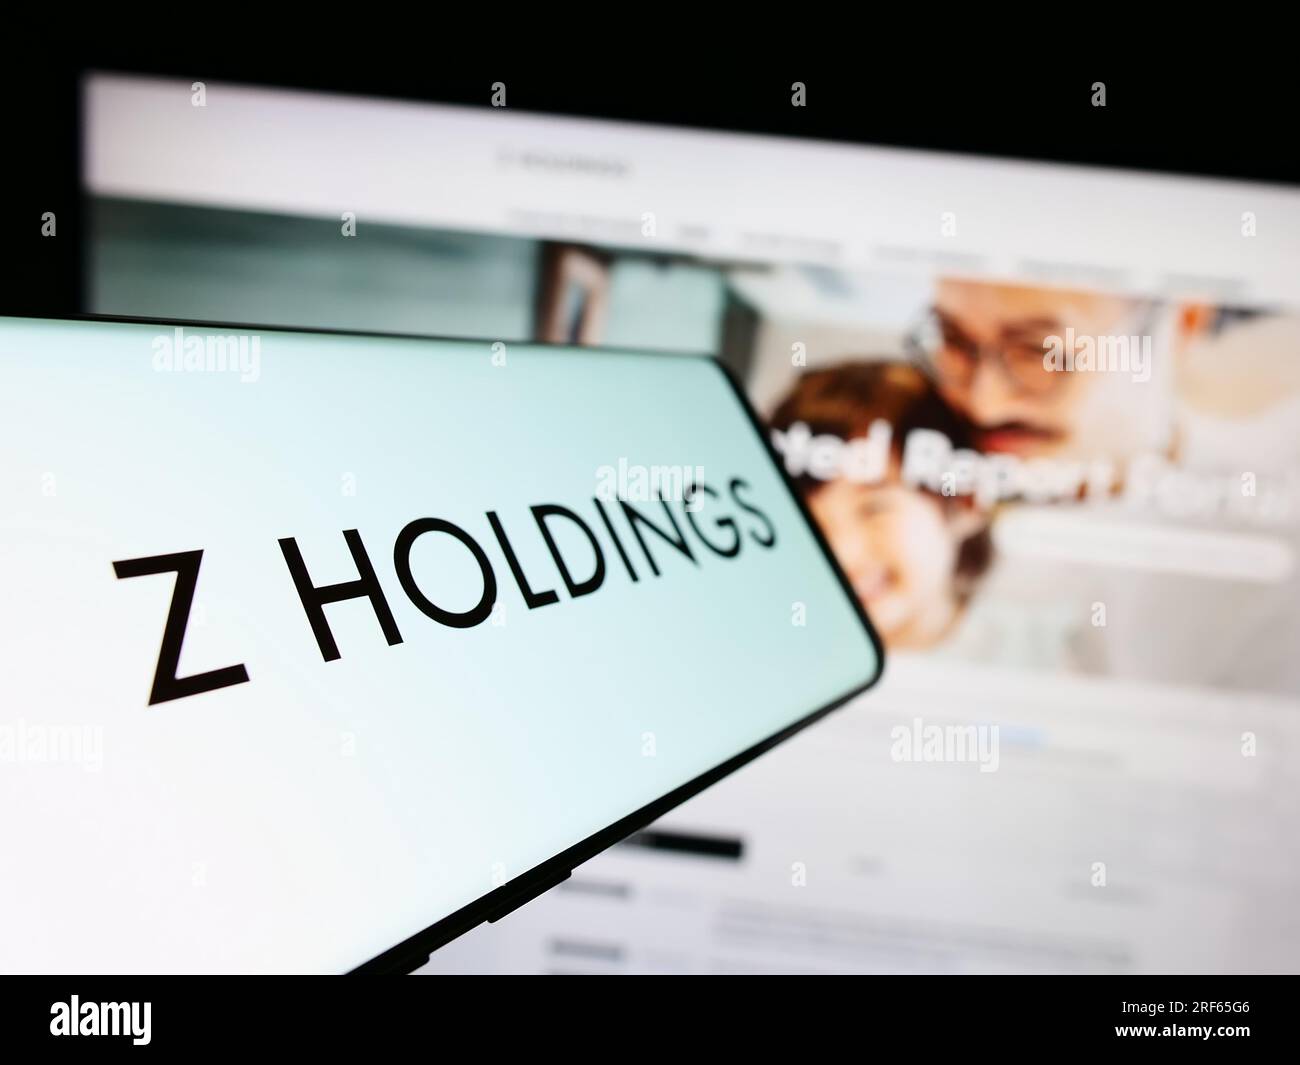 Cellphone with logo of Japanese company Z Holdings Corporation on screen in front of business website. Focus on left of phone display. Stock Photo